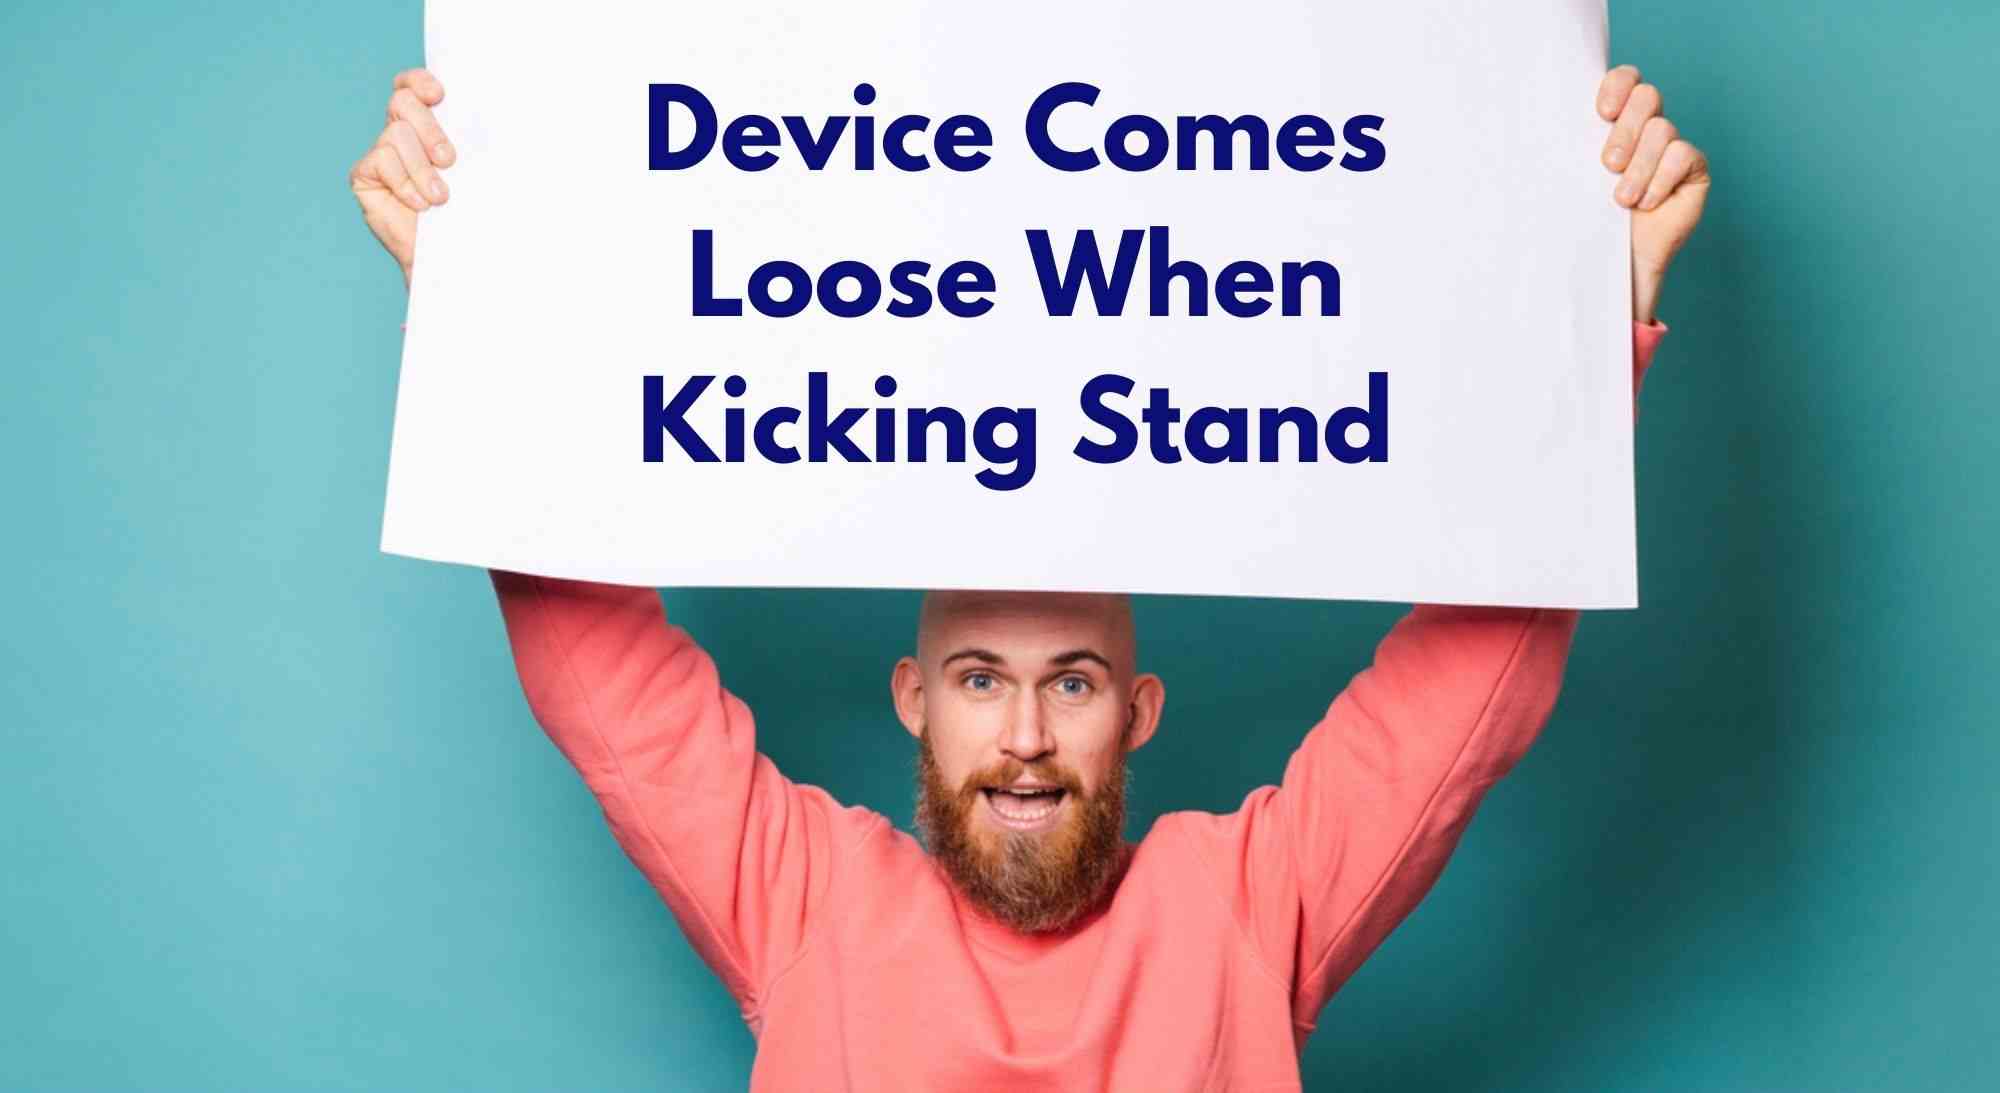 Device Comes Loose When Kicking Stand